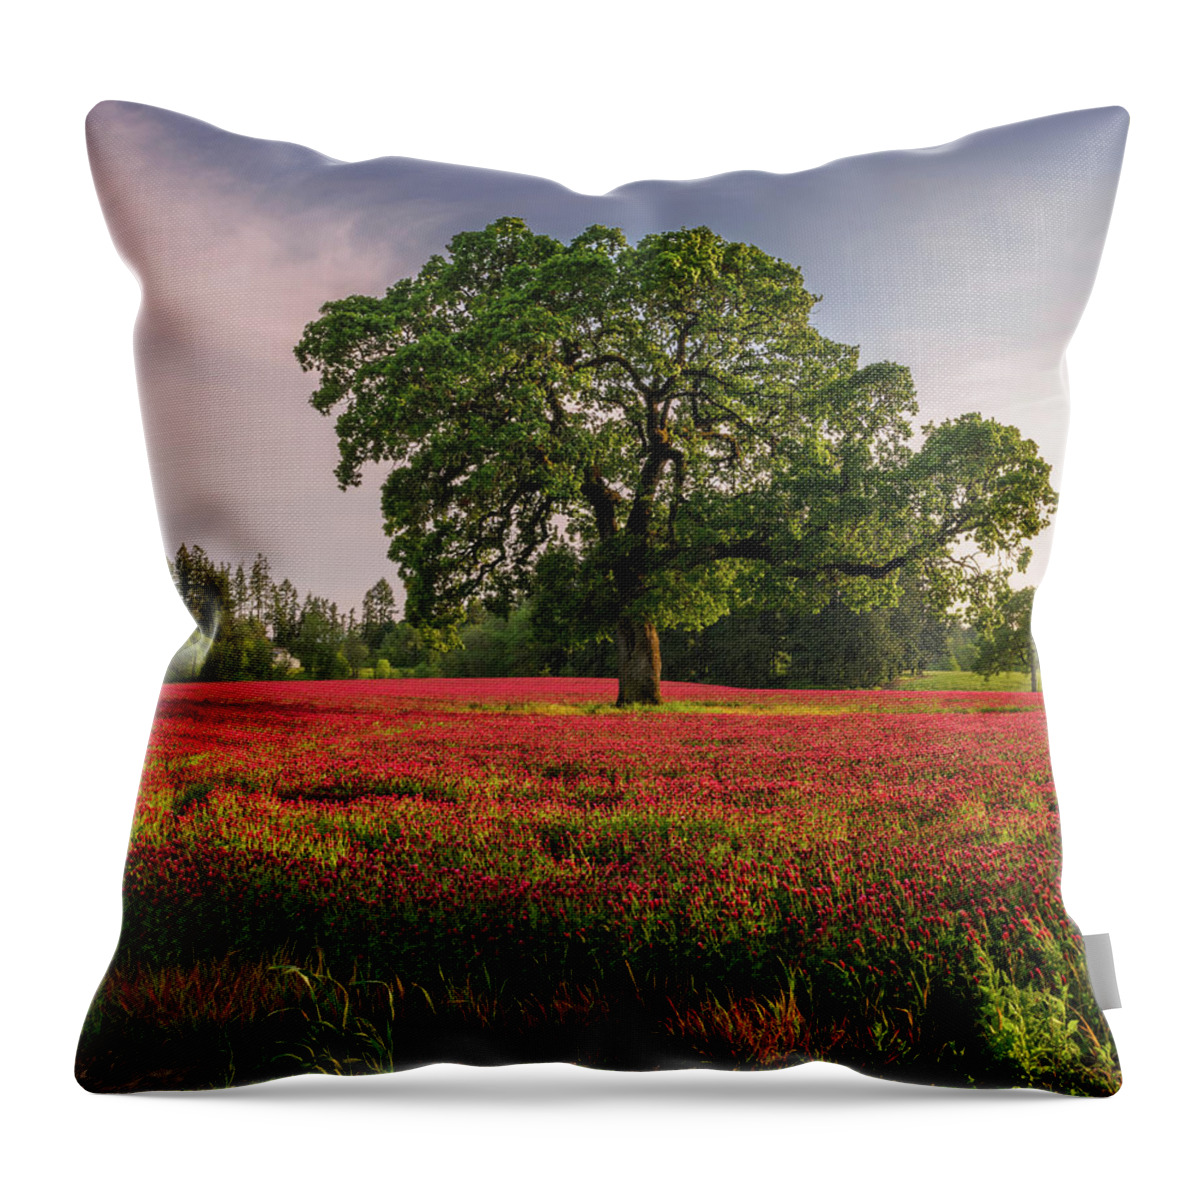 Scenics Throw Pillow featuring the photograph Lone Oak In Clover Field by Jason Harris